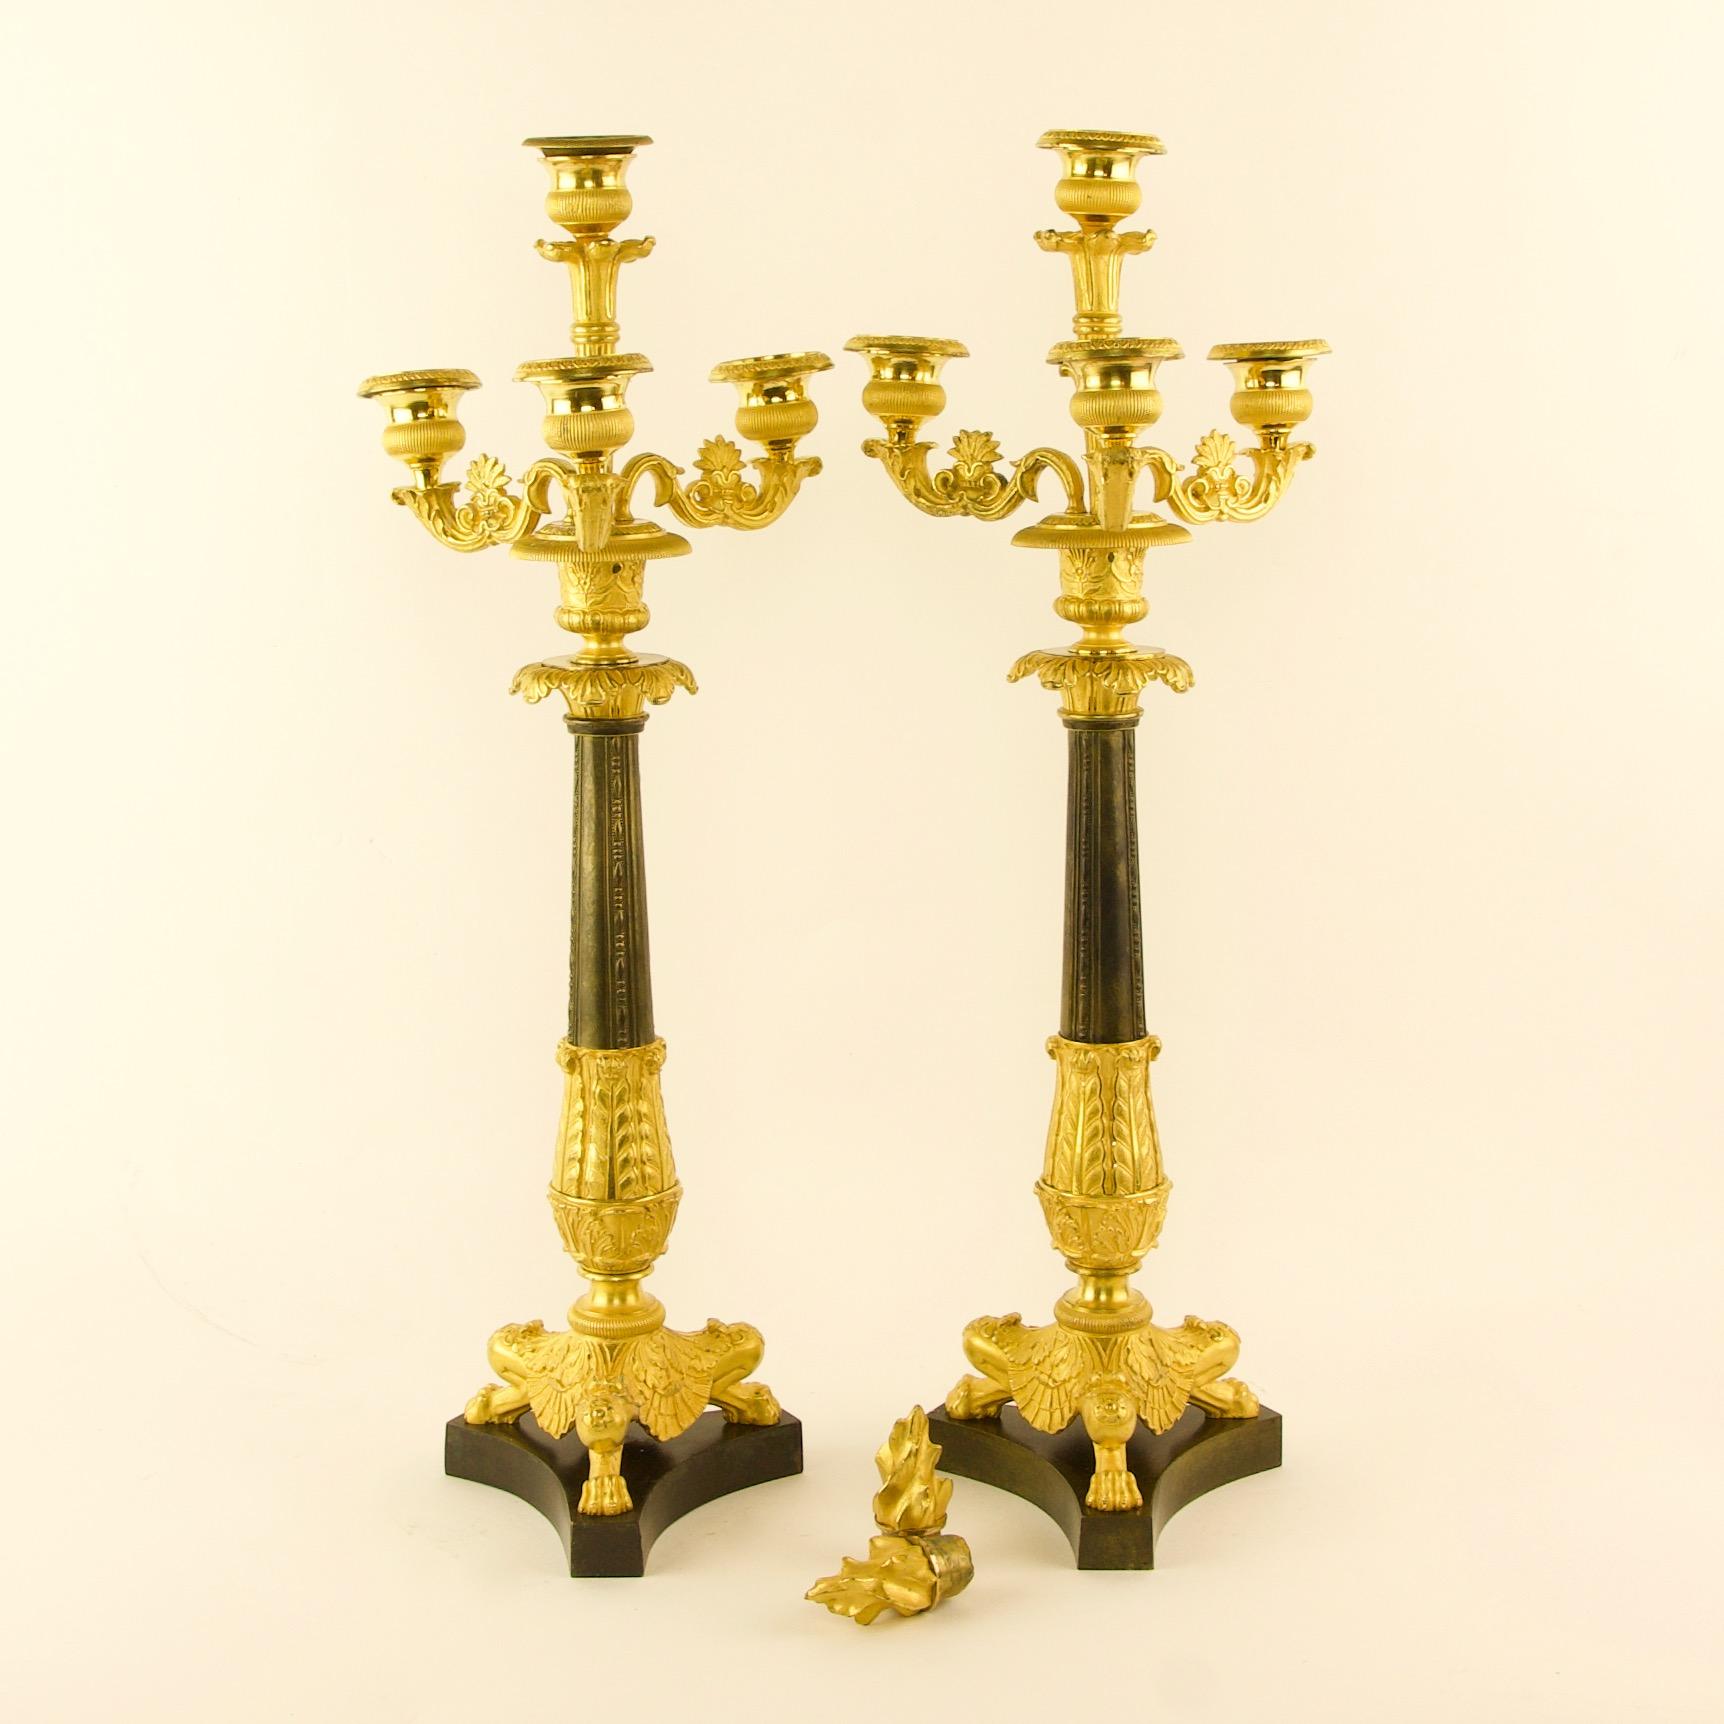 Pair of 19th century Empire ormolu and patinated bronze candelabra attr. Thomire

Each with a tapering leaf tip cast partially gilt and patinated bronze stem supporting three foliate carved candle branches with vase-shaped bobeches and removable